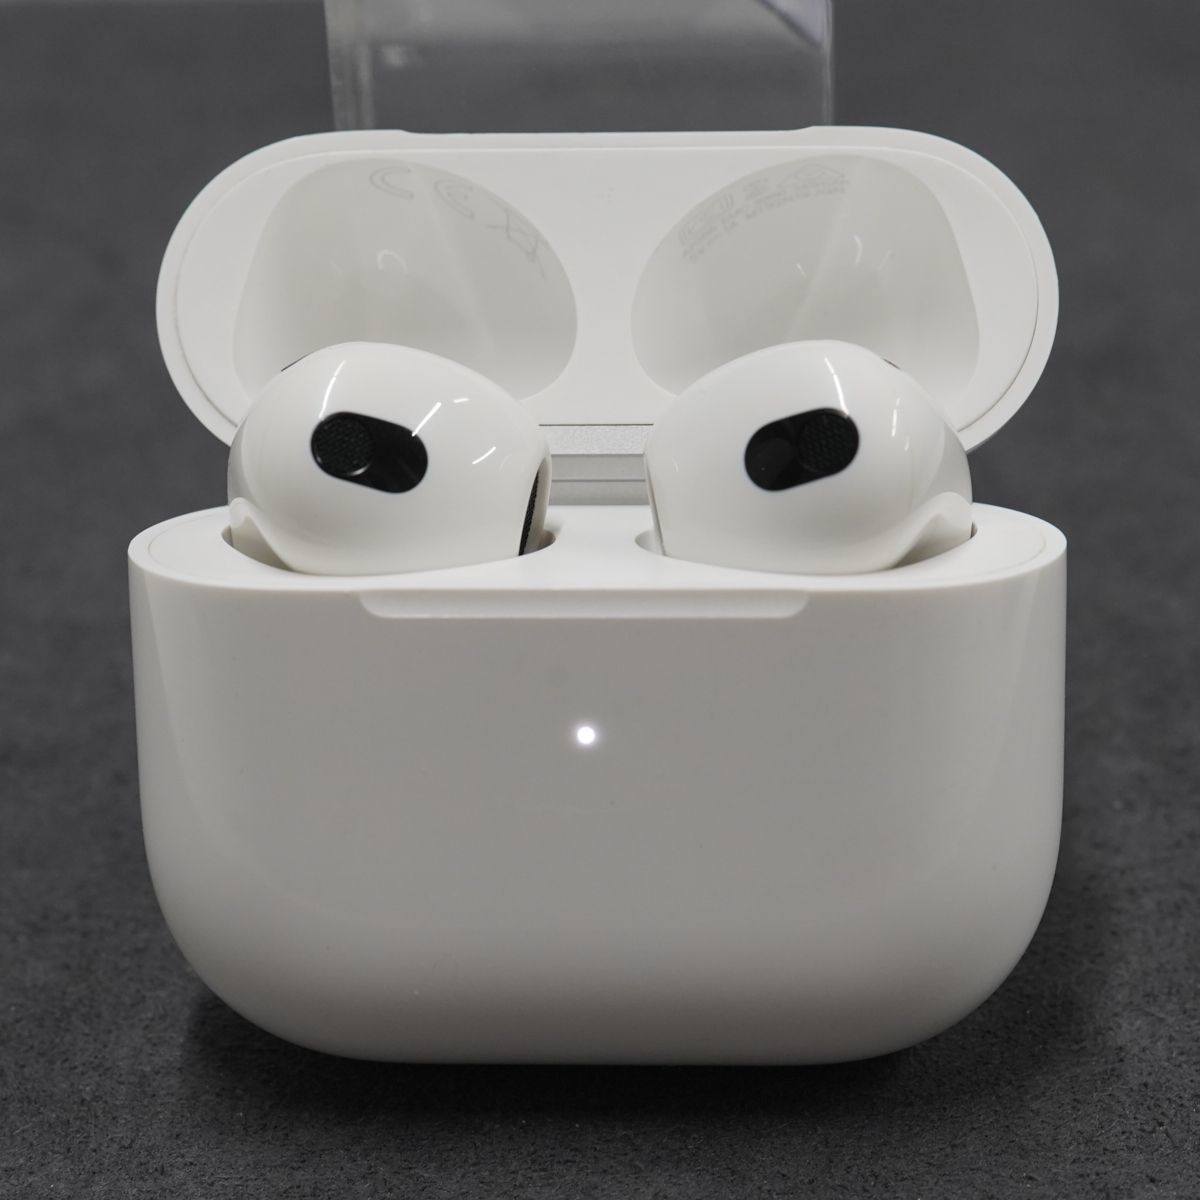 Apple AirPods 第三世代 MagSafe充電ケース付 USED超美品 ワイヤレス